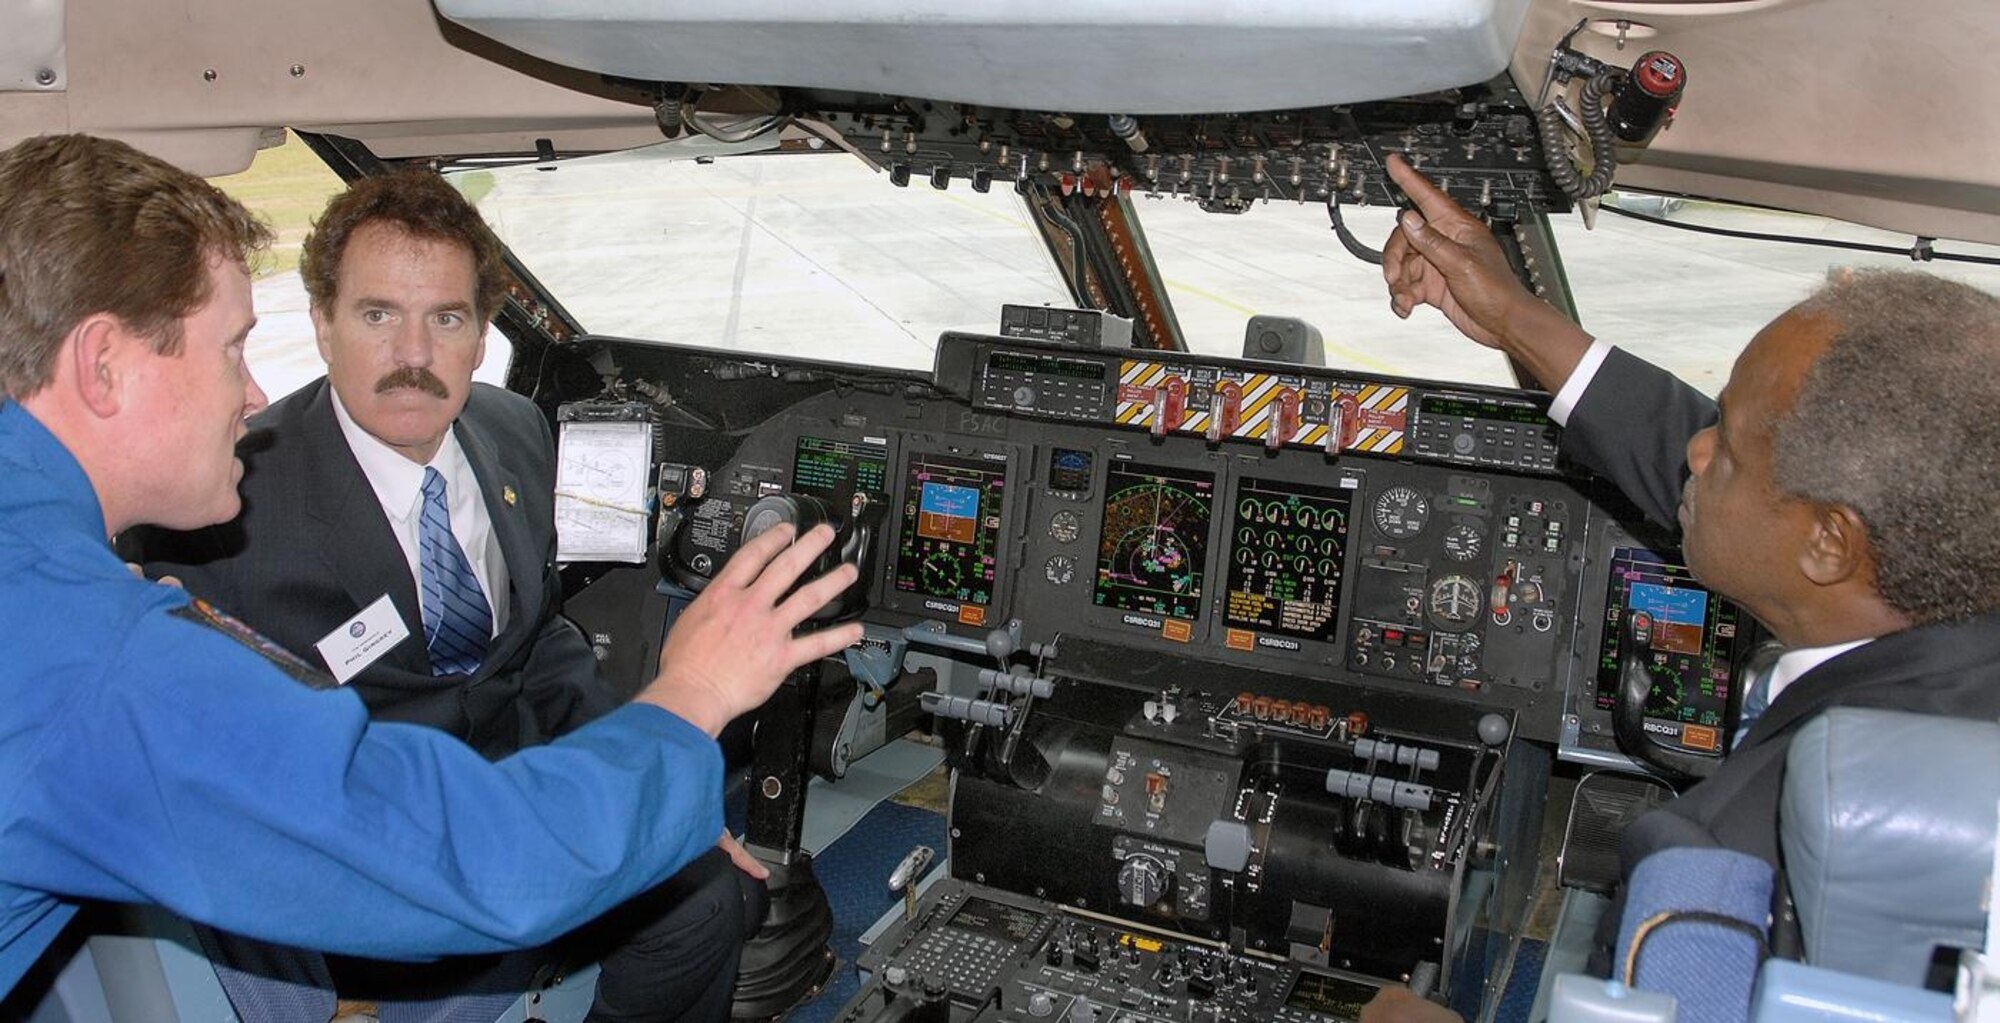 Attendees to the recent C-5M Roll-out ceremony at the Lockheed Martin facility in Marietta, Ga., receive a hands-on experience of the C-5M’s modern cockpit. (Courtesy photo)